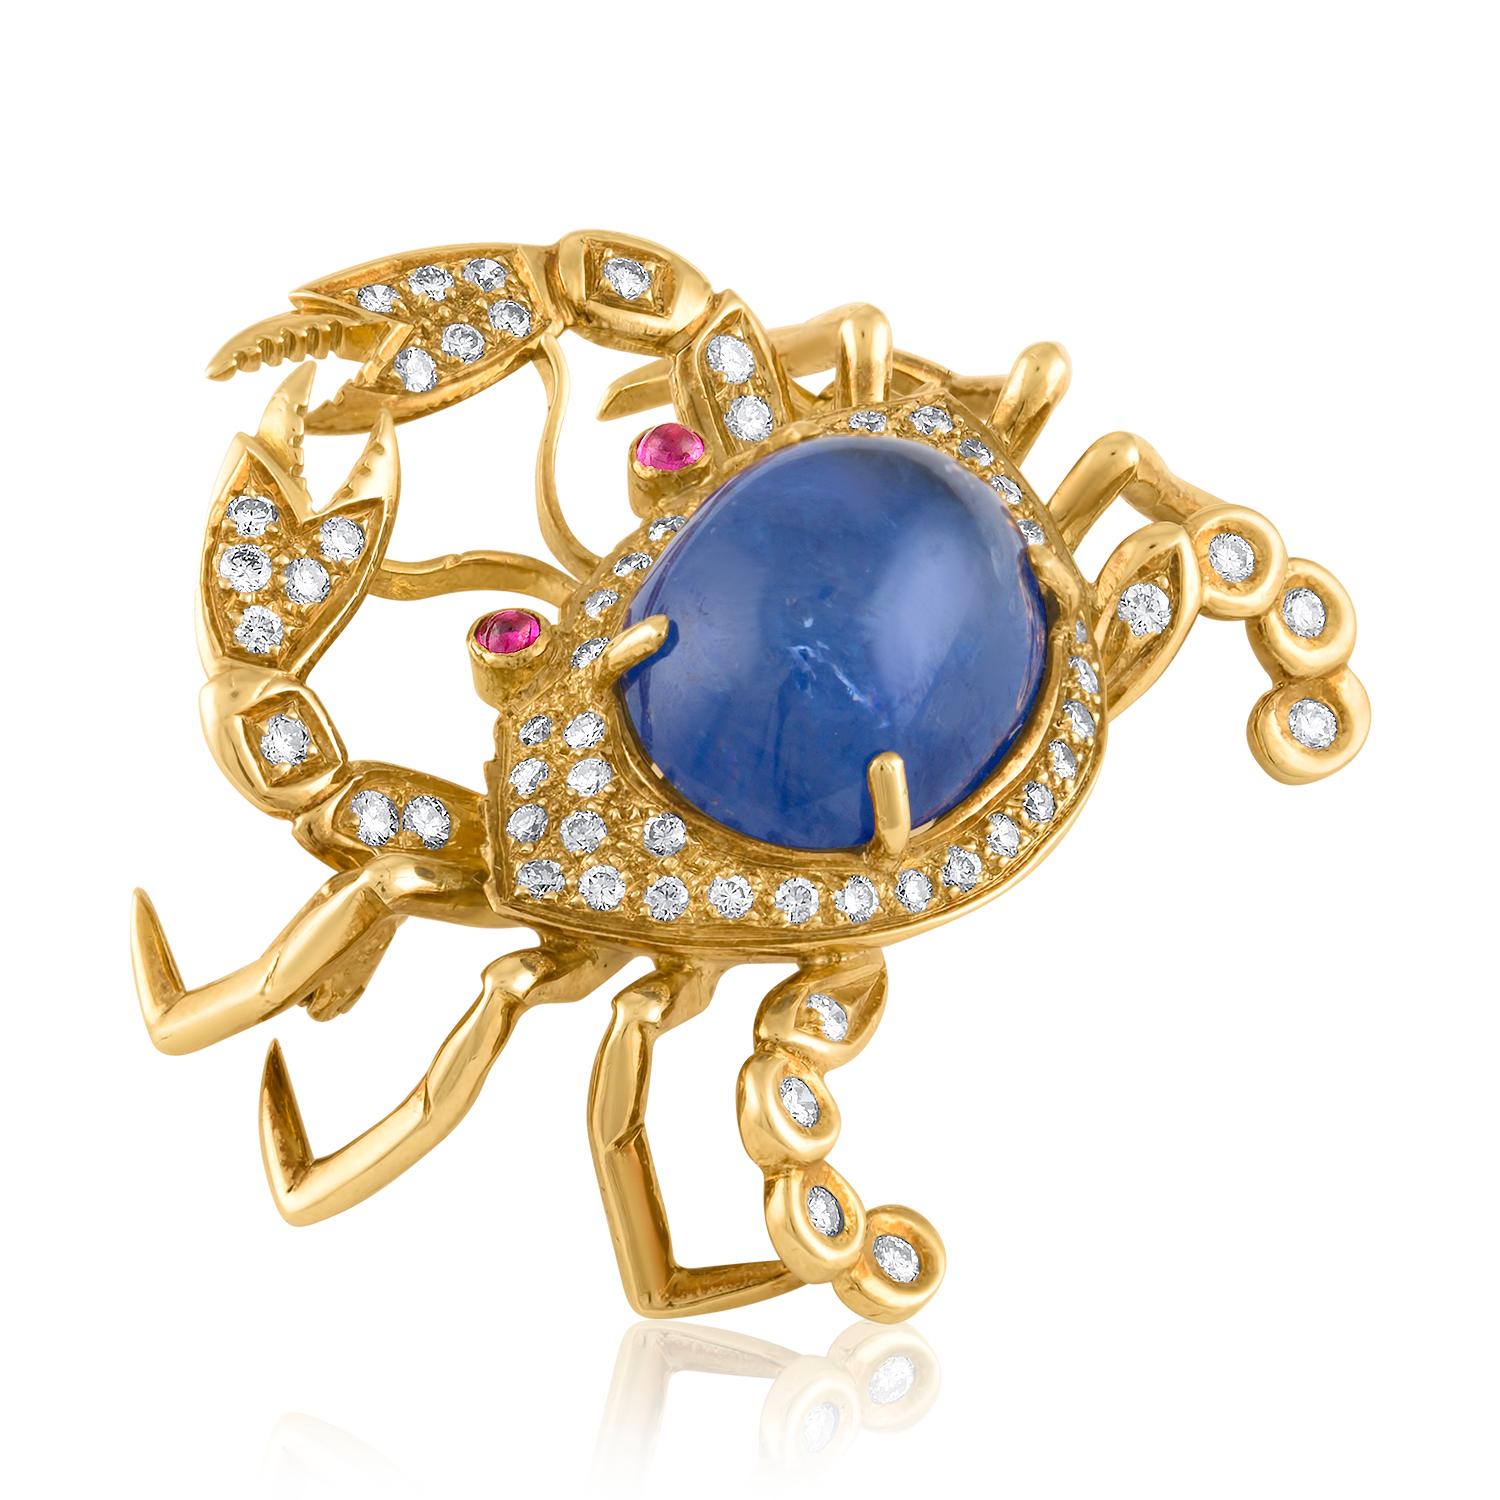 18K yellow gold, diamond, sapphire and ruby crab pin by Tiffany & Co is pave-set with diamonds with two ruby cabochon eyes, and an oval blue sapphire cabochon body, approx. 7 carats. 